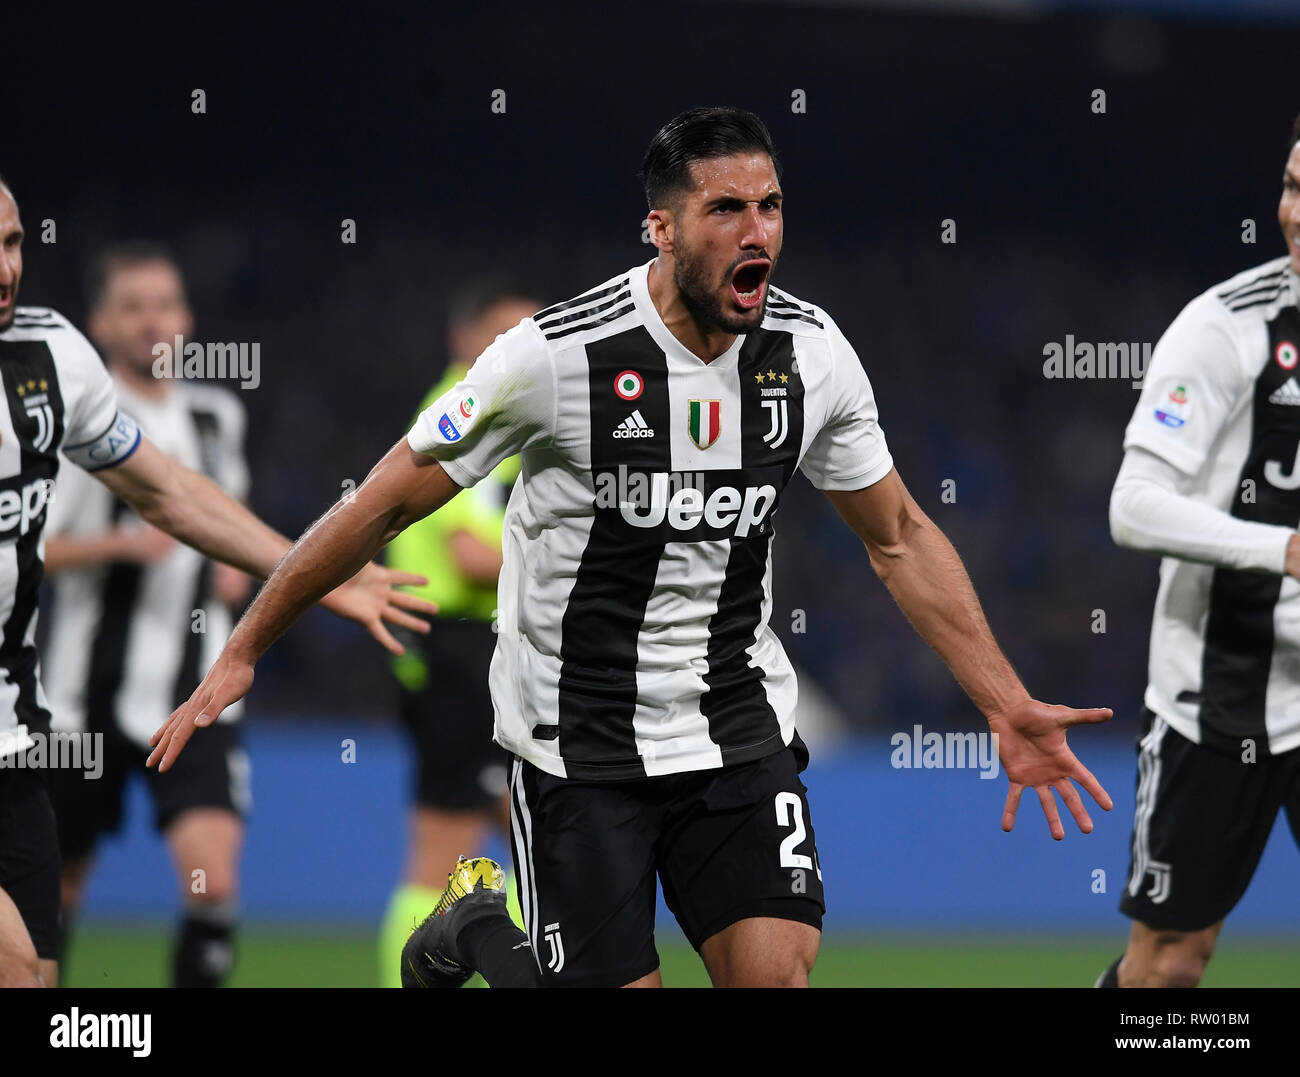 Napoli, Italy. 3rd Mar, 2019. Juventus's Emre Can (front) celebrates his  goal during a Serie A soccer match between Napoli and Juventus in Napoli,  Italy, March 3, 2019. Juventus won 2-1. Credit: